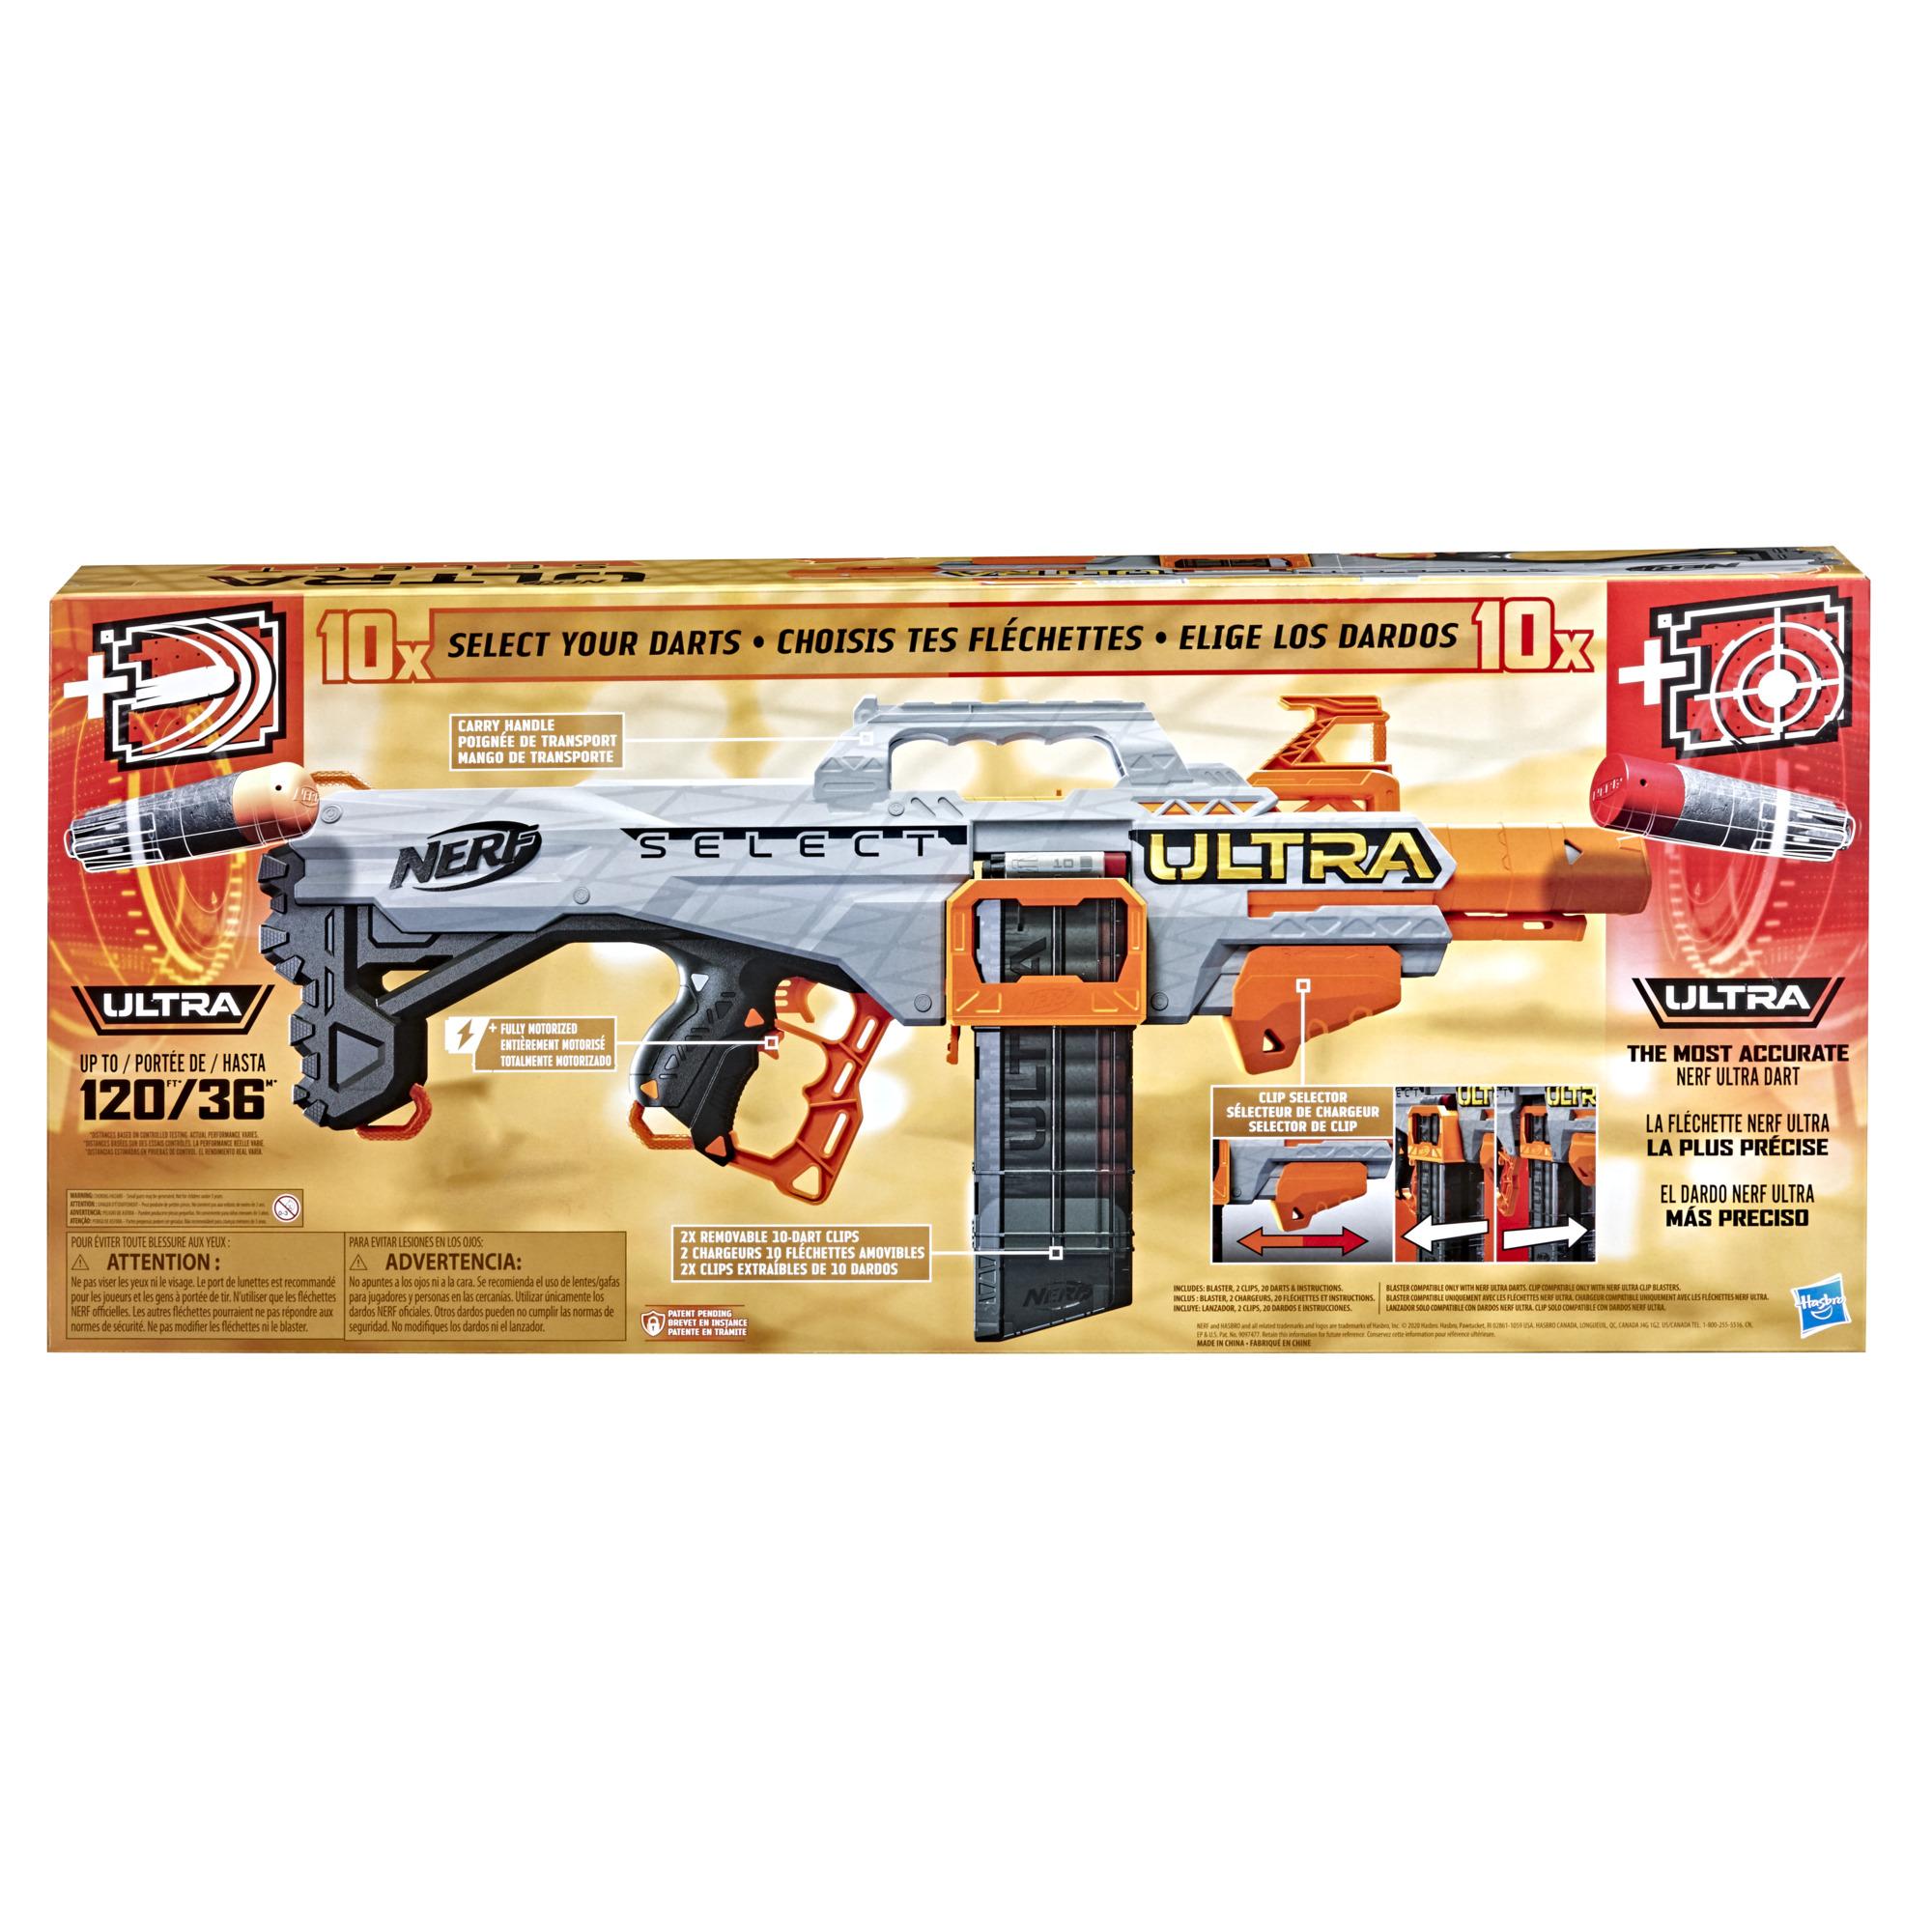 Nerf Ultra Select Fully Motorized Blaster Fire 2 Ways Includes Clips And Darts Compatible